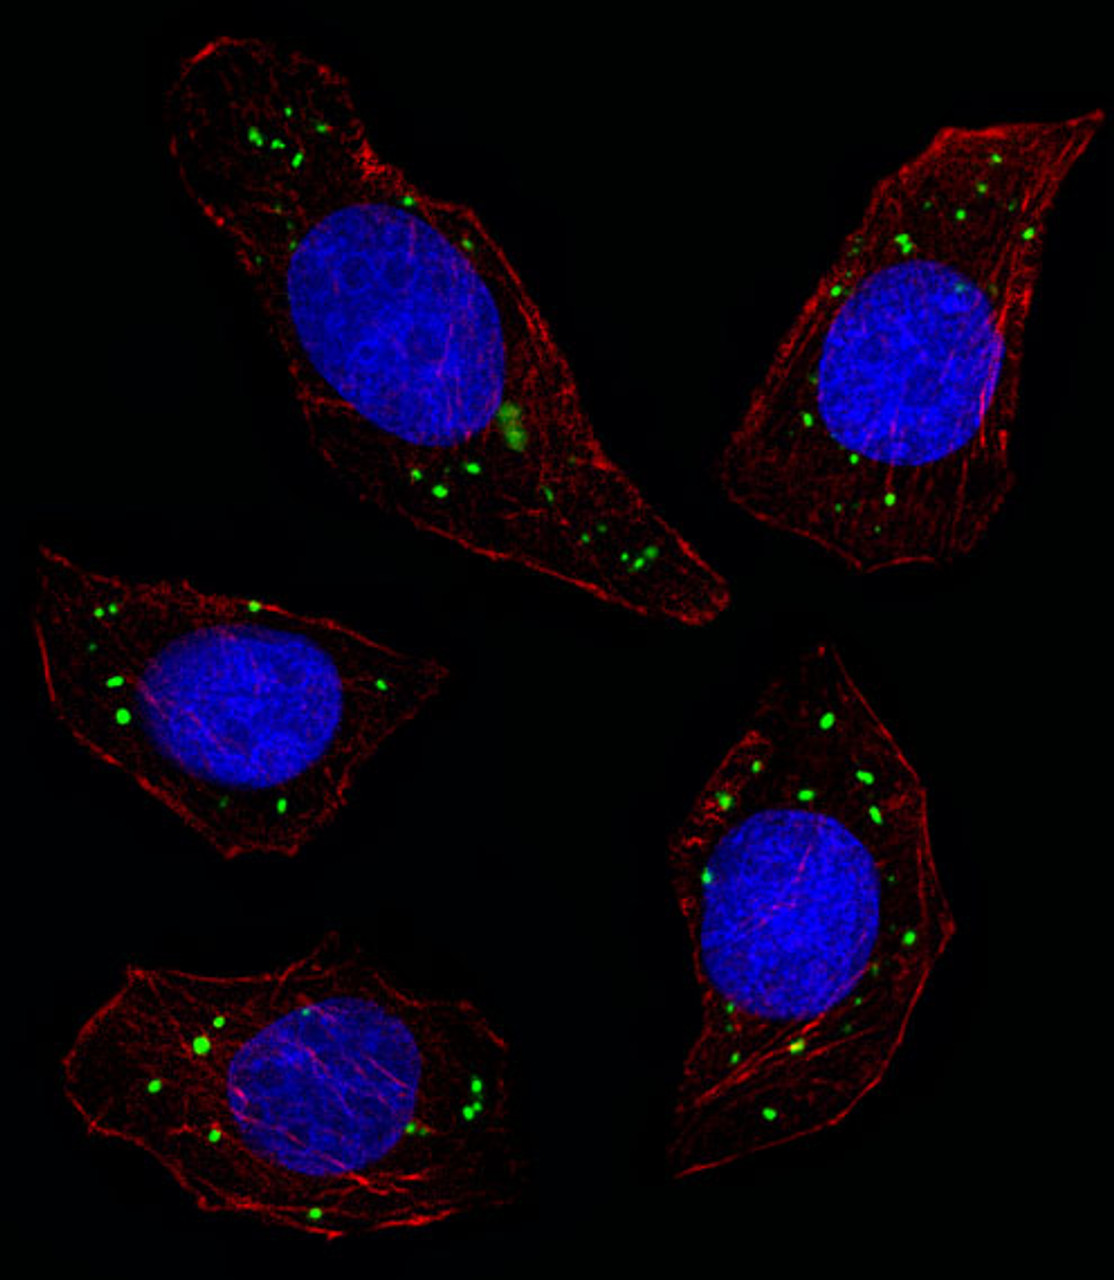 Fluorescent image of U251 cell stained with MERTK Antibody.U251 cells were fixed with 4% PFA (20 min) , permeabilized with Triton X-100 (0.1%, 10 min) , then incubated with MERTK primary antibody (1:25) . For secondary antibody, Alexa Fluor 488 conjugated donkey anti-rabbit antibody (green) was used (1:400) .Cytoplasmic actin was counterstained with Alexa Fluor 555 (red) conjugated Phalloidin (7units/ml) . Nuclei were counterstained with DAPI (blue) (10 ug/ml, 10 min) .MERTK immunoreactivity is localized to Vesicles significantly.